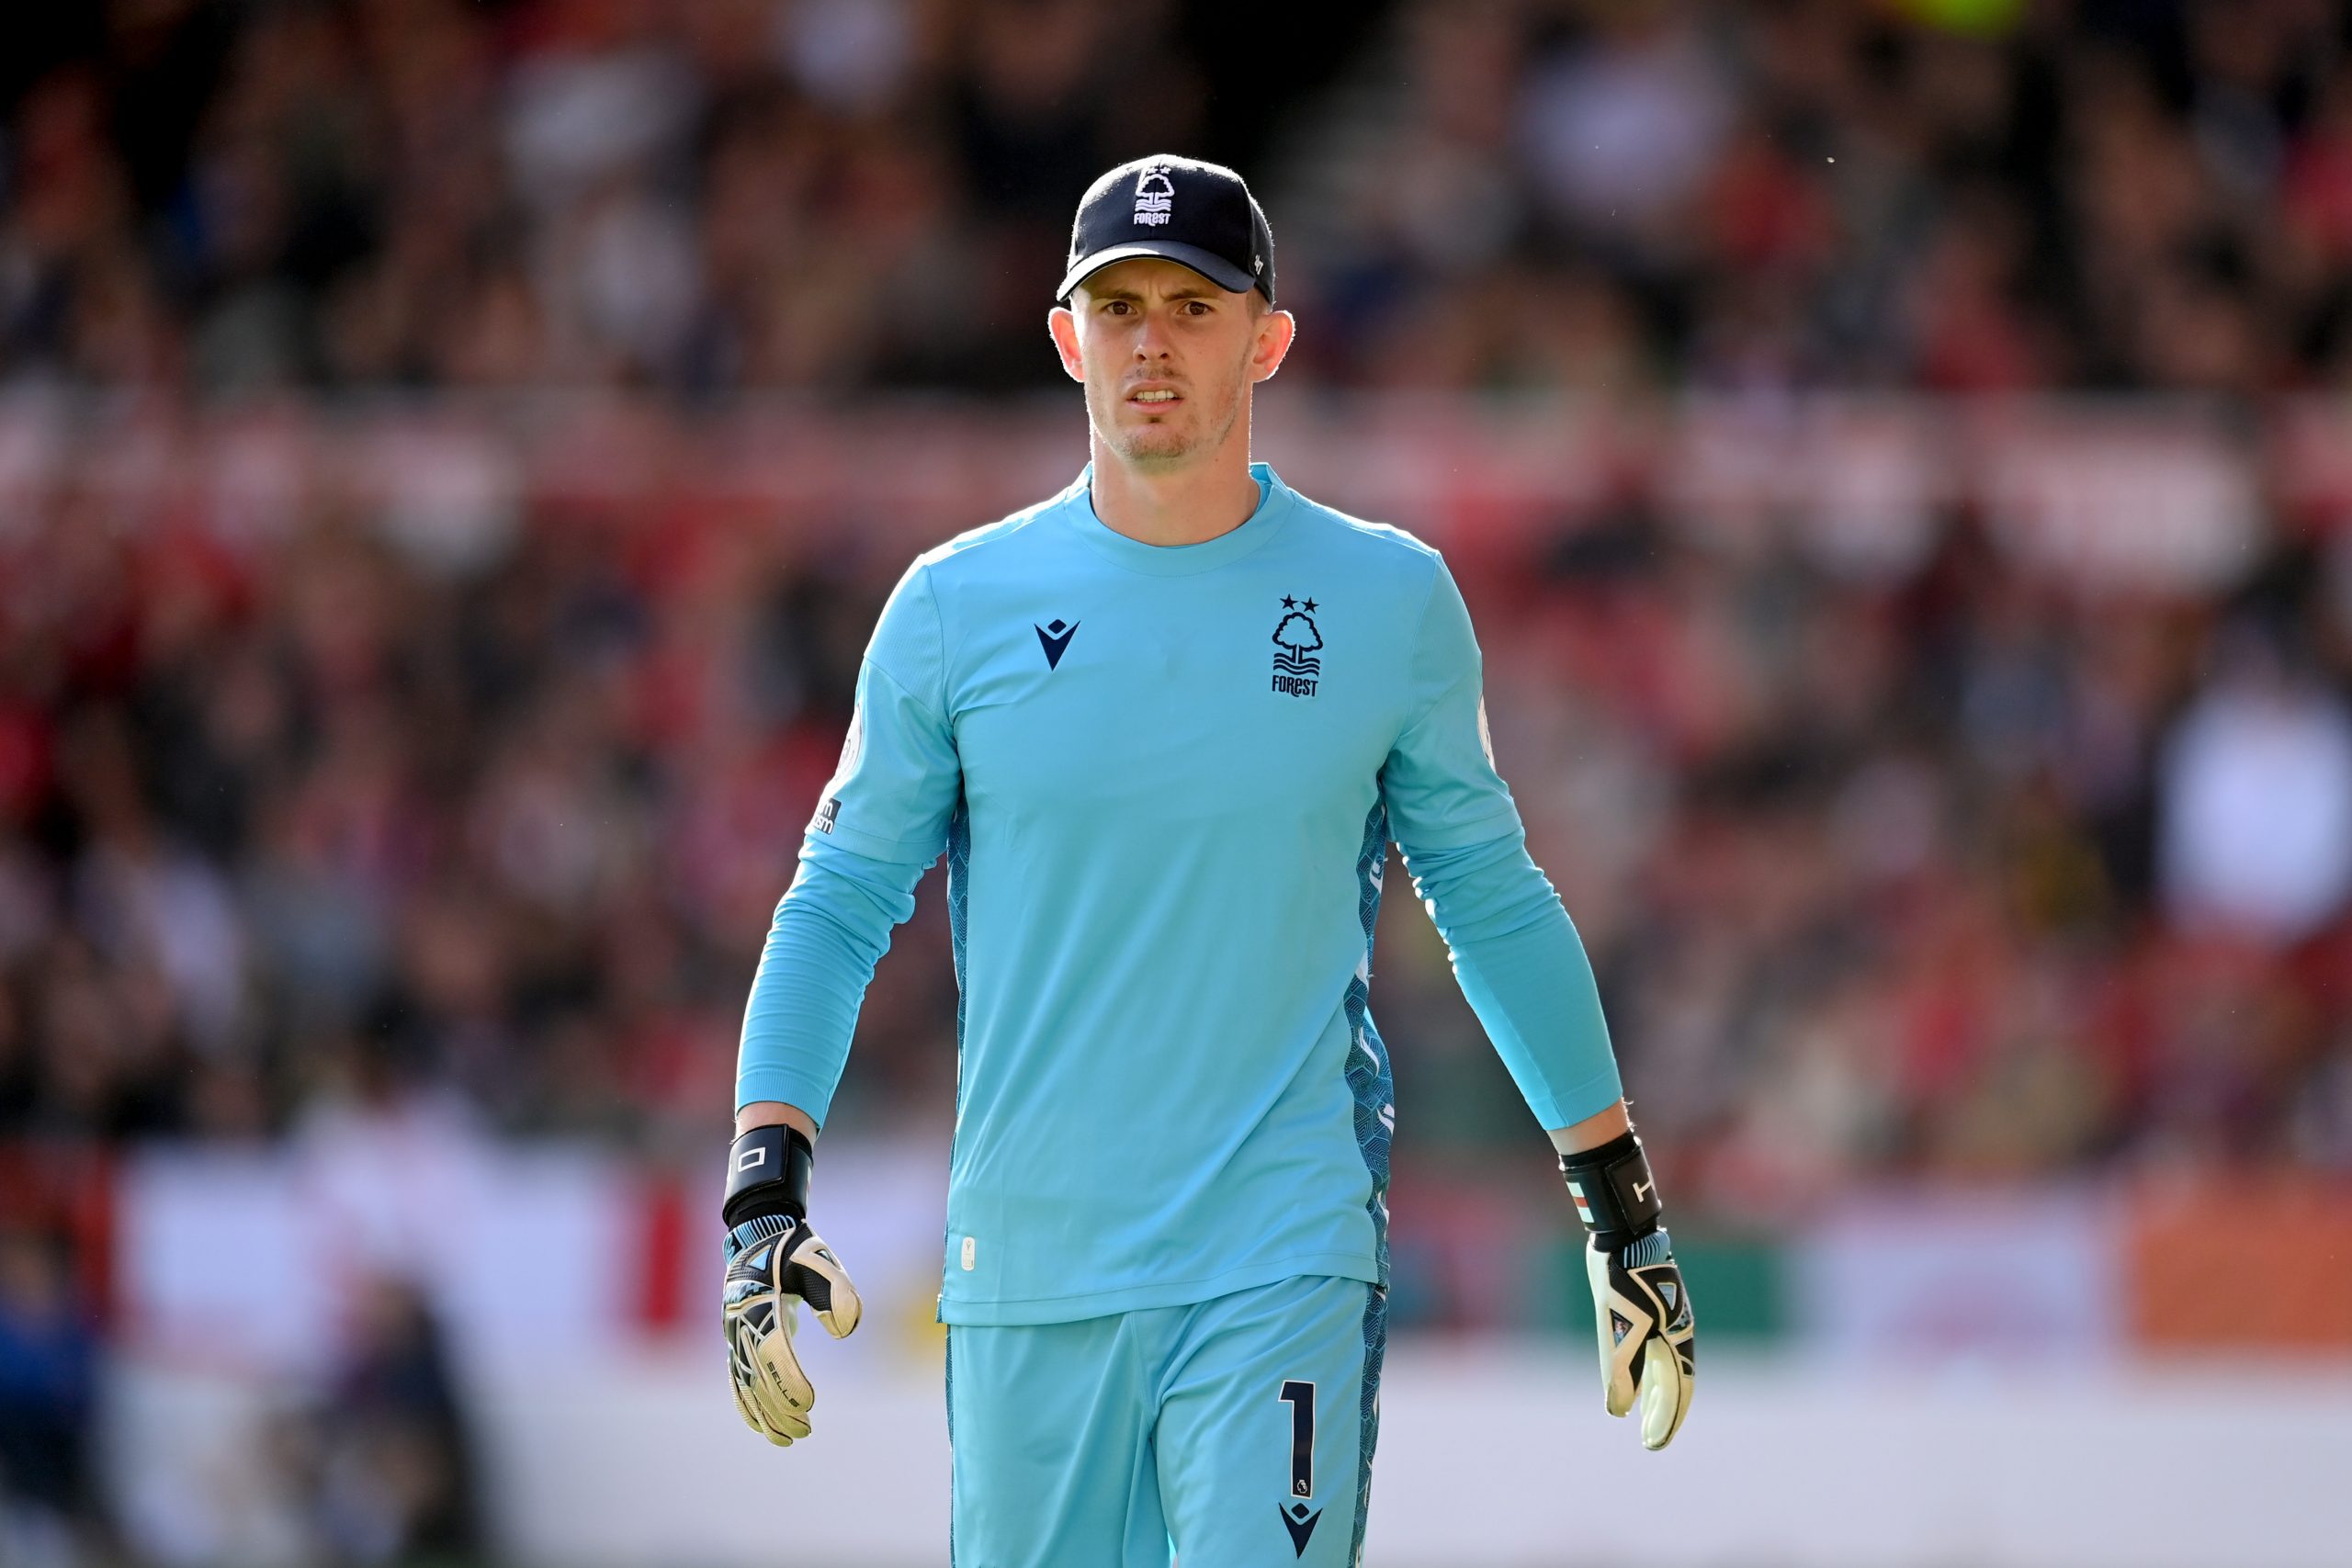 Dean Henderson injury 'may affect' Manchester United summer transfer.